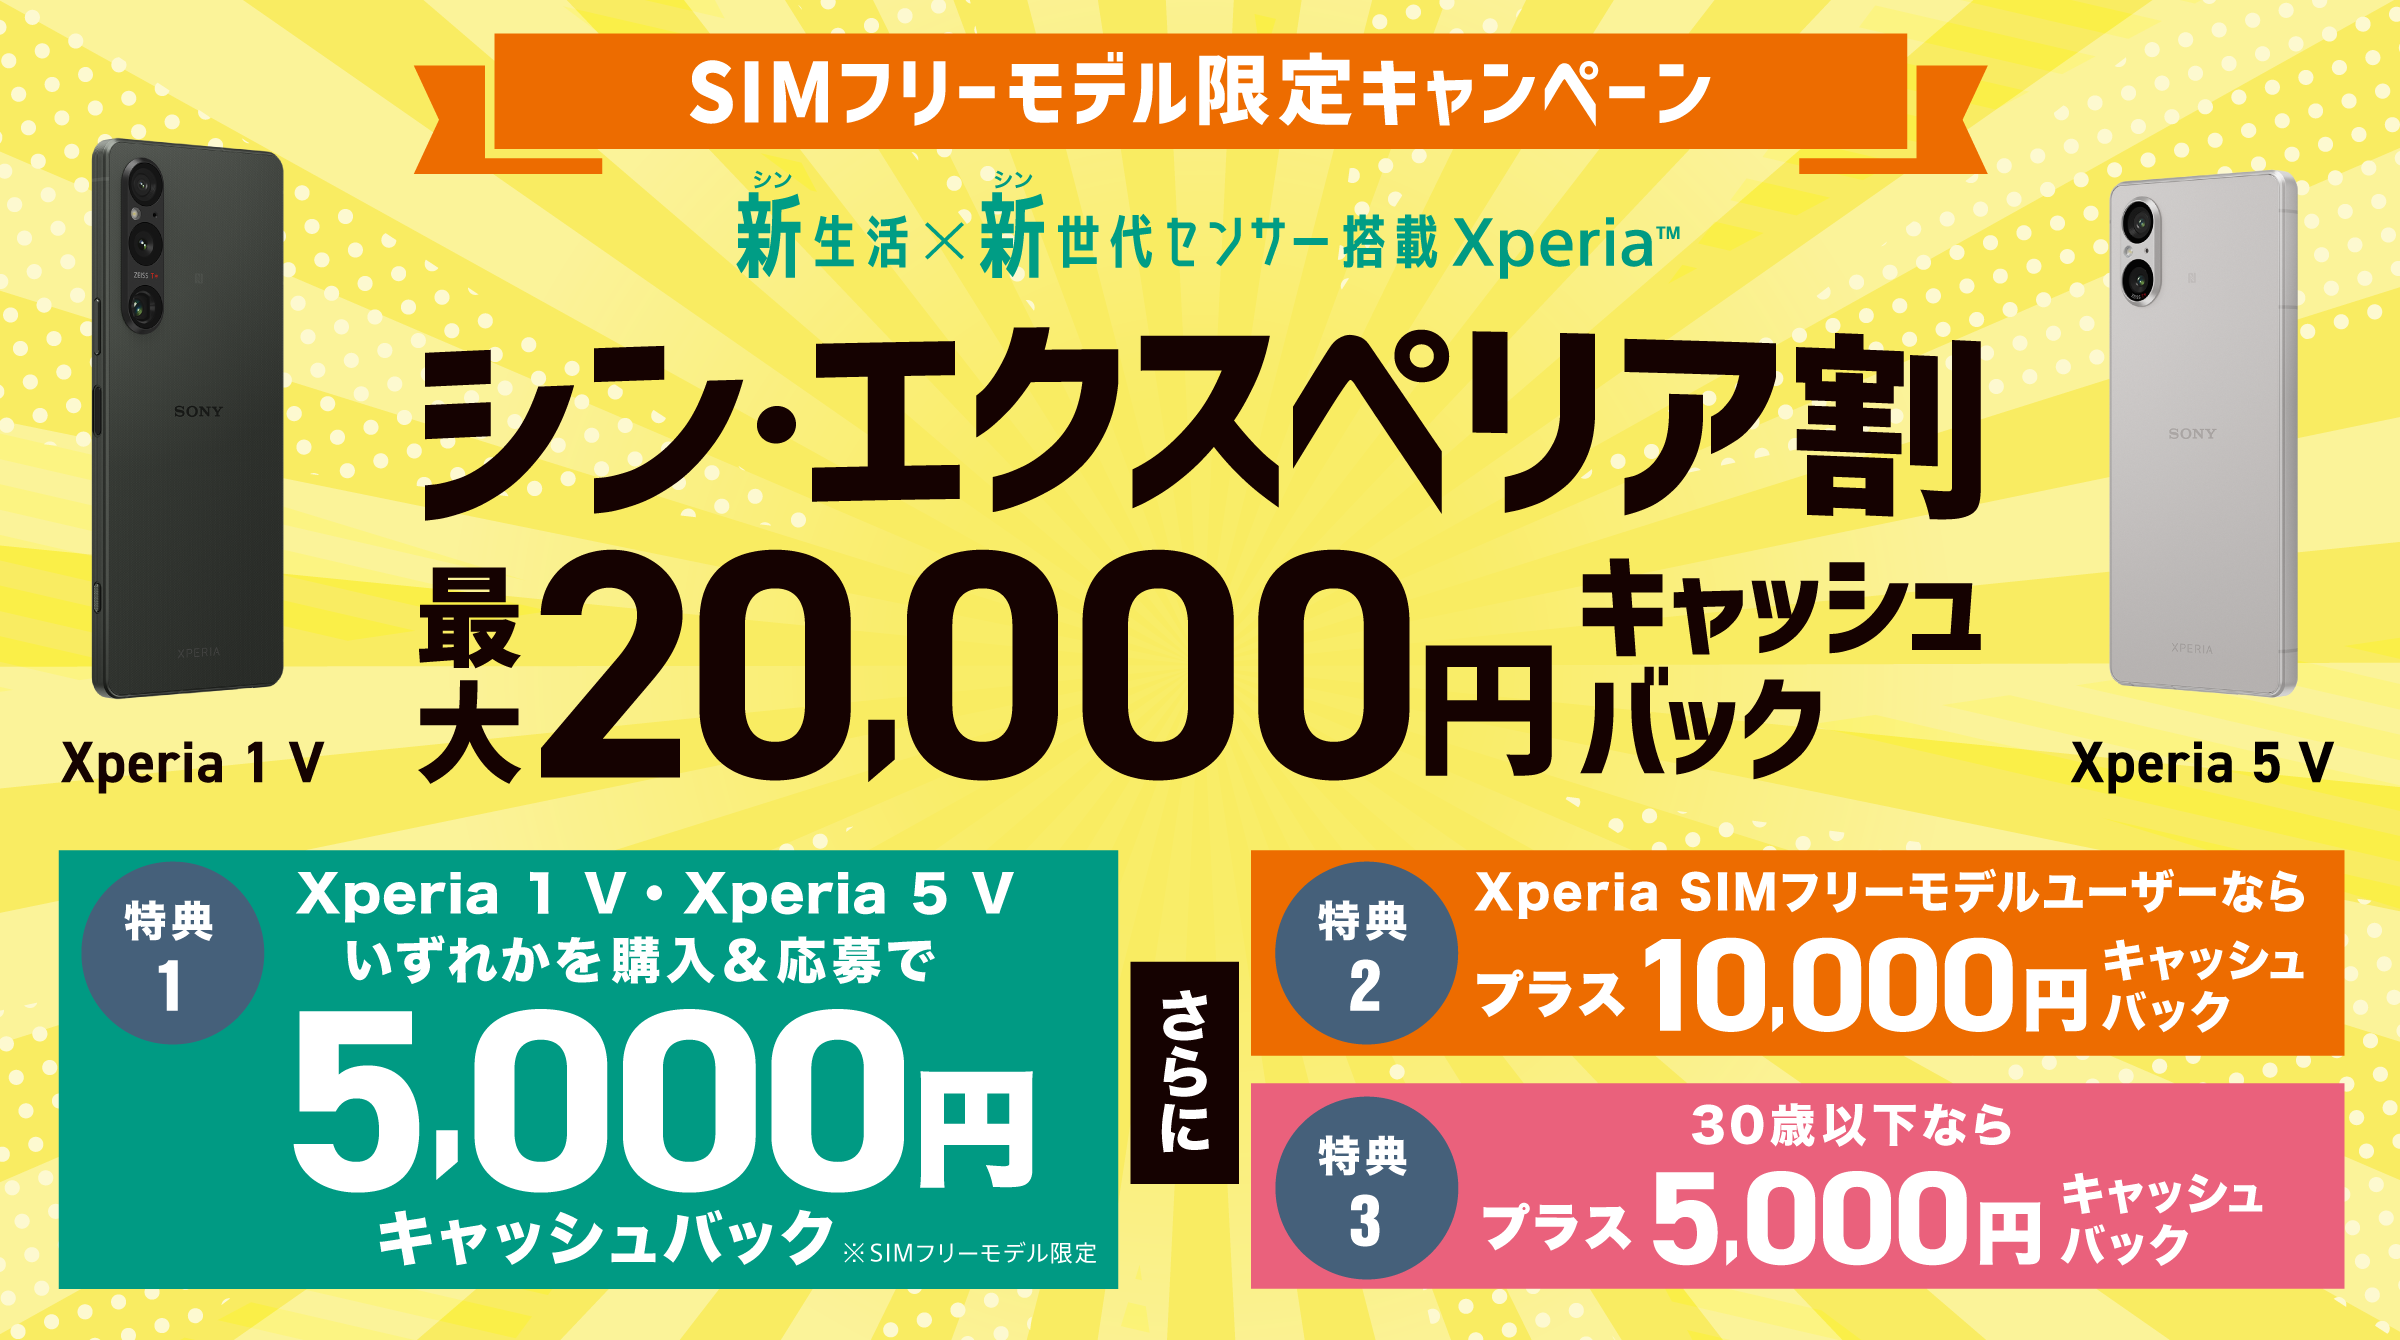 SIMフリーモデル限定キャンペーン 新生活×新世代センサー搭載Xperia シン・エクスペリア割 最大20,000円キャッシュバック 特典1 Xperia 1 V・Xperia 5 V いずれかを購入＆応募で 5,000円キャッシュバック ※SIMフリーモデル限定 さらに 特典2 Xperia SIMフリーモデルユーザーなら プラス10,000円キャッシュバック 特典3 30歳以下なら プラス5,000円キャッシュバック